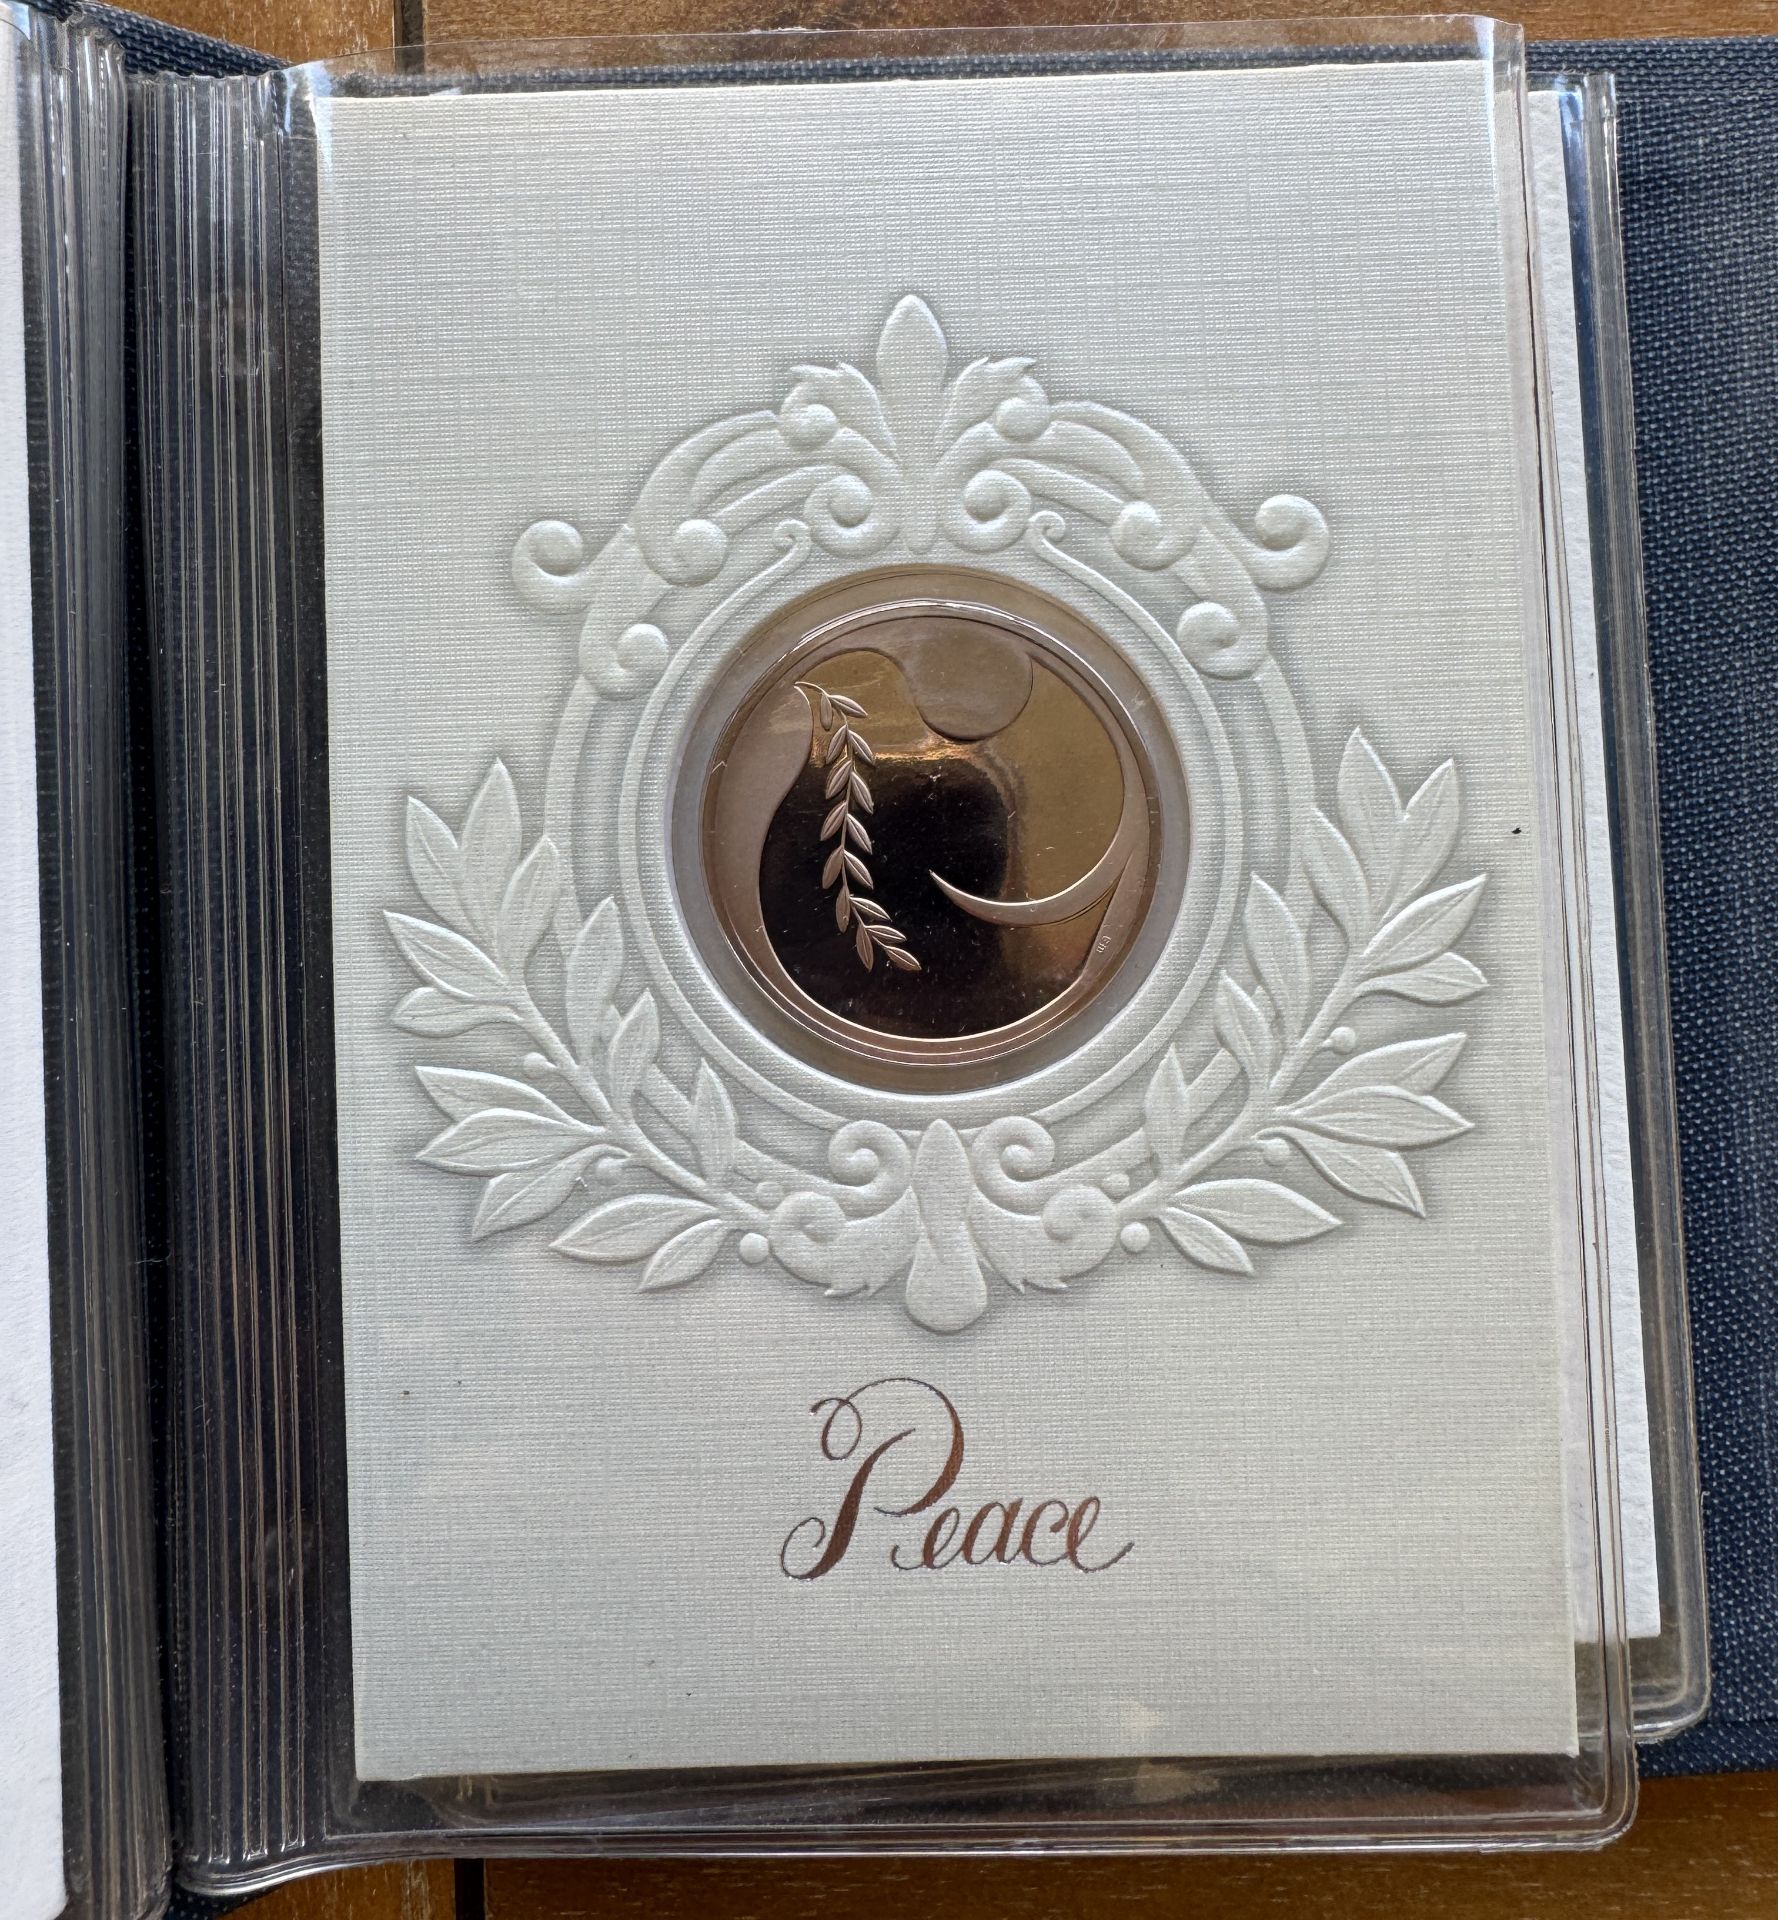 COIN COLLECTION CATALOG - Image 2 of 5